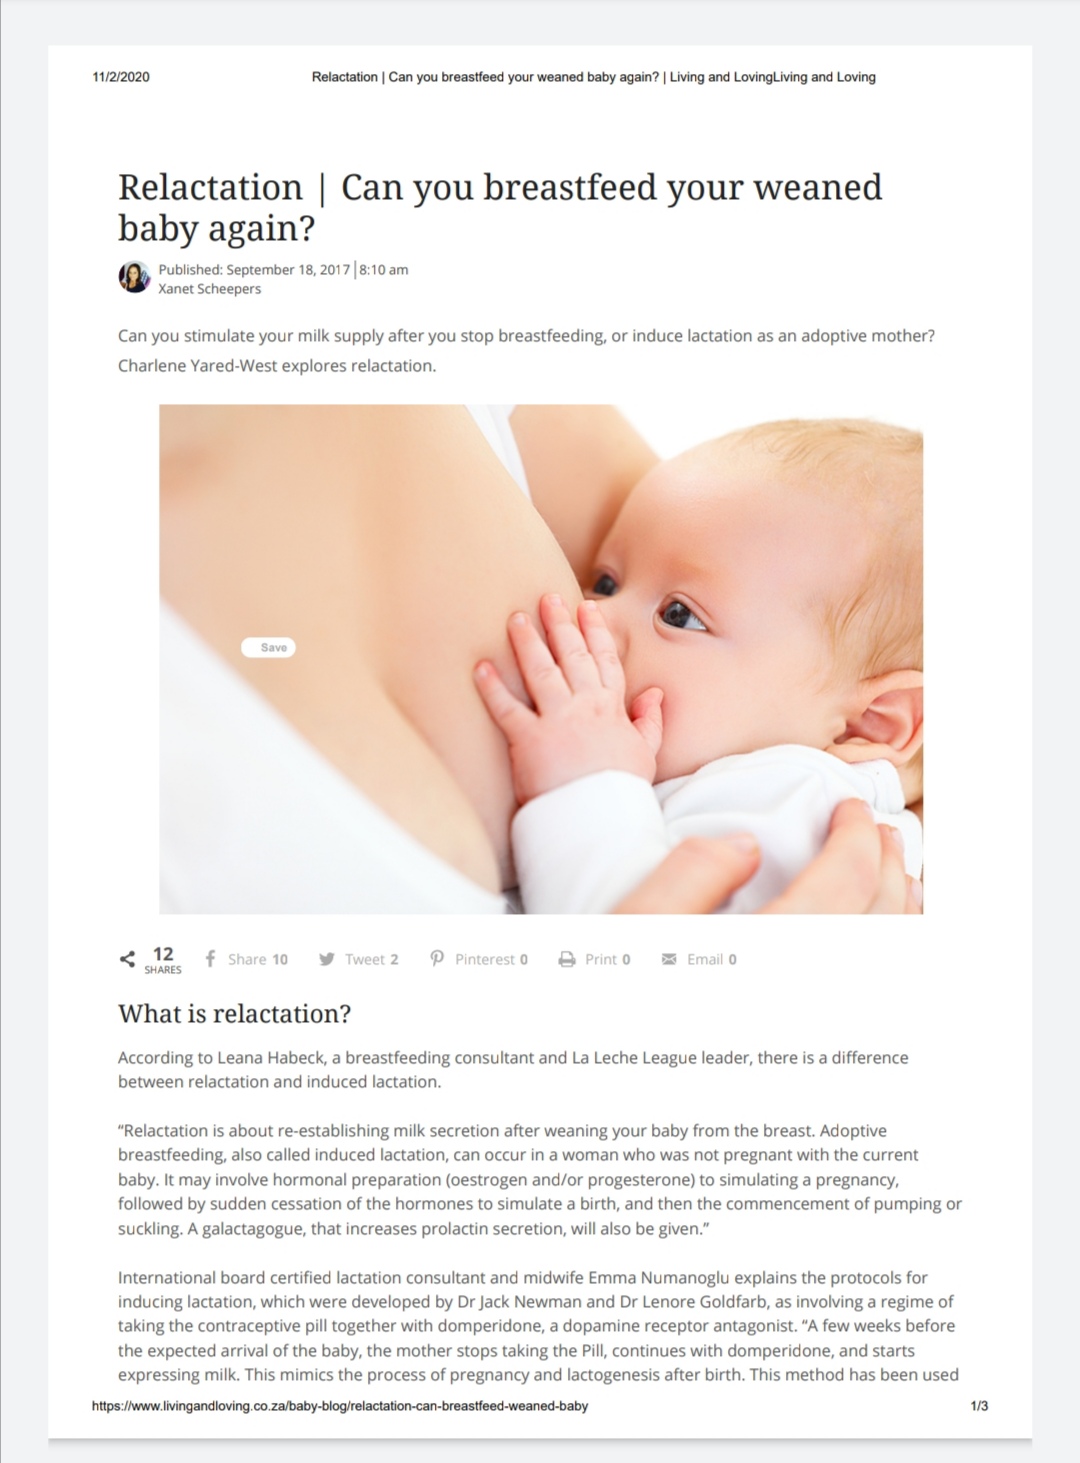 Relactation: Can you breastfeed your weaned baby again? – Charlene Yared  West